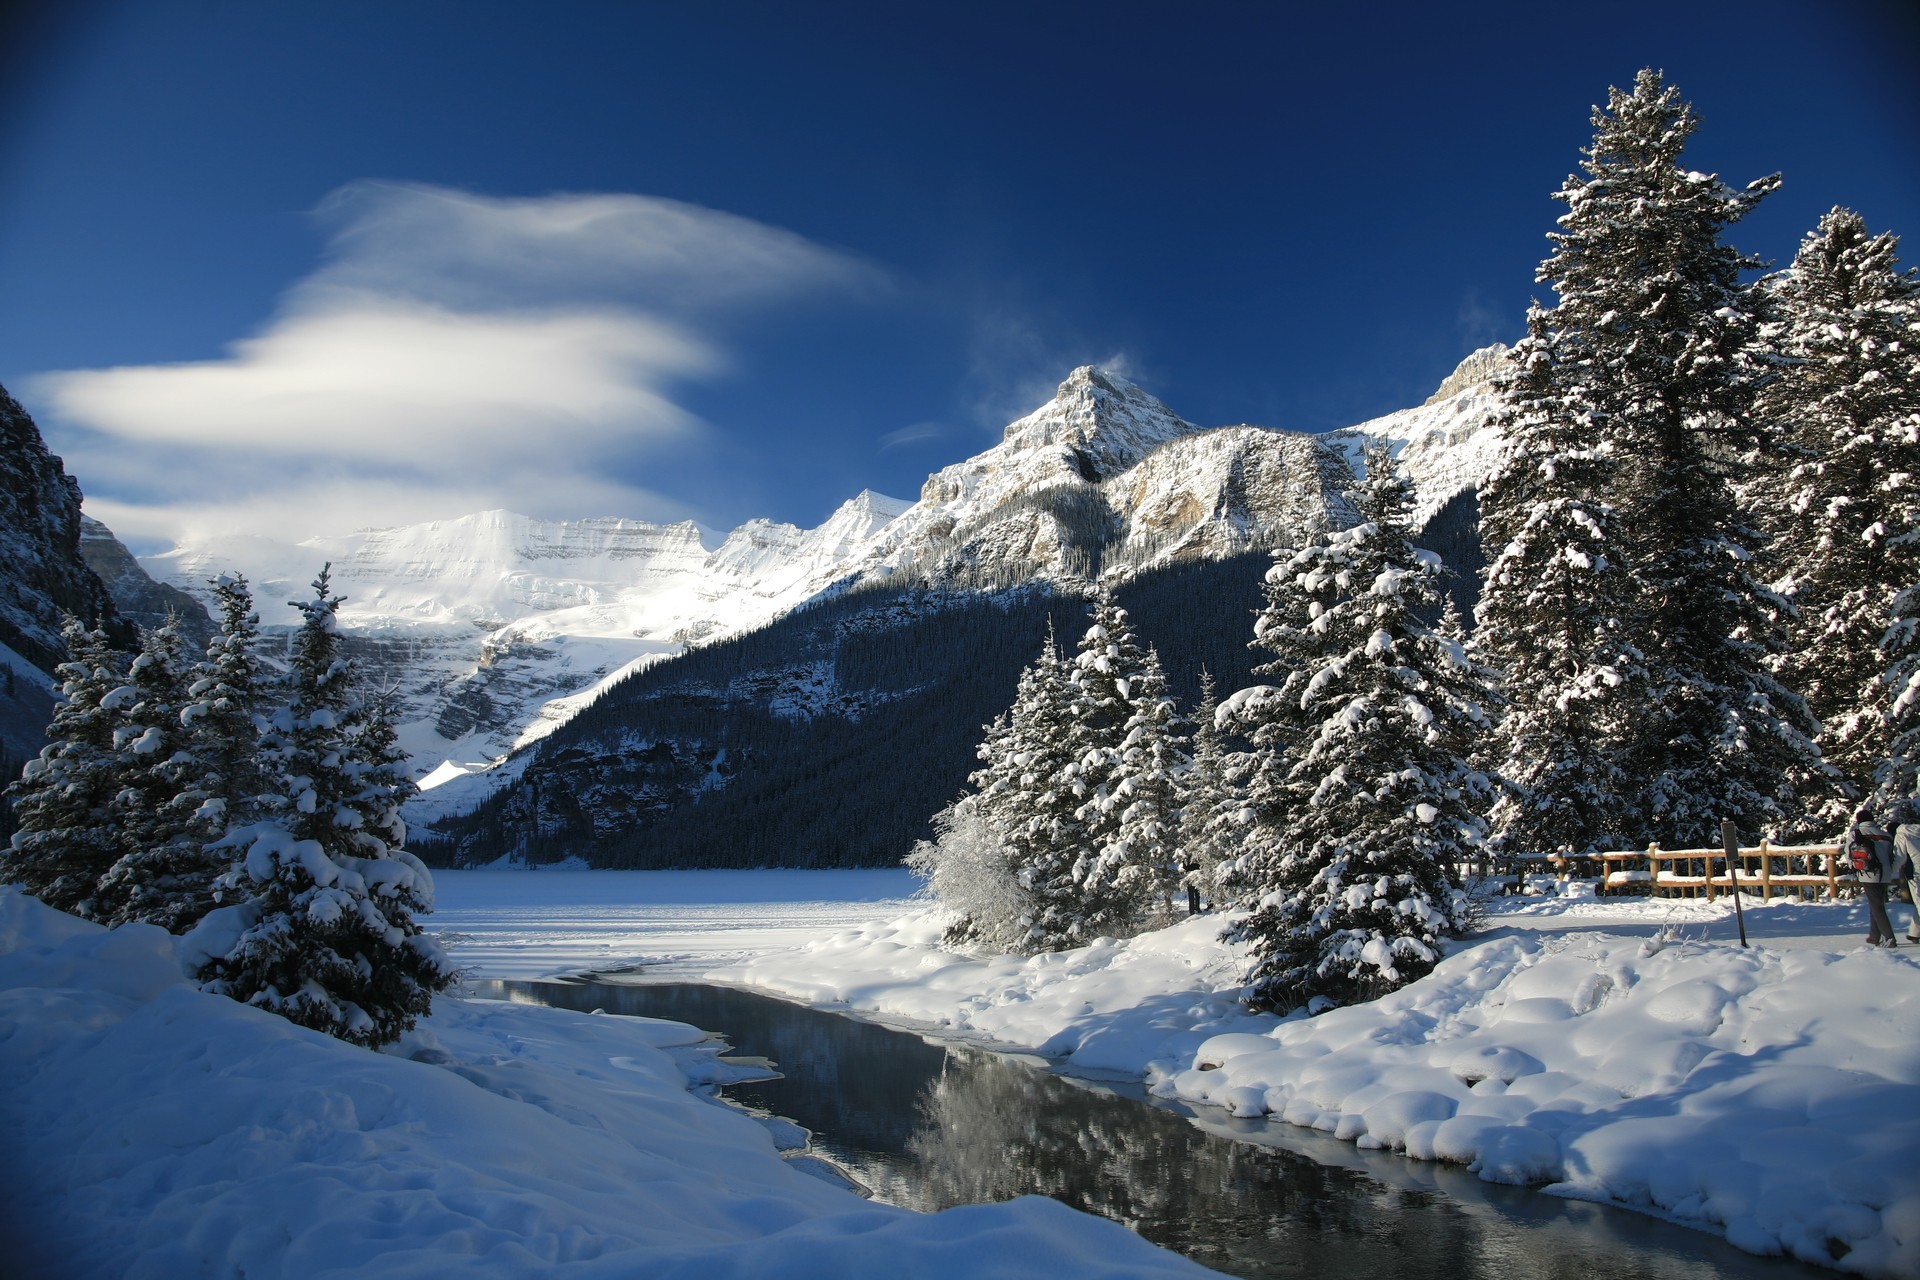 General 1920x1280 winter snow snowy mountain landscape Banff National Park Lake Louise clouds mountains nature cold creeks